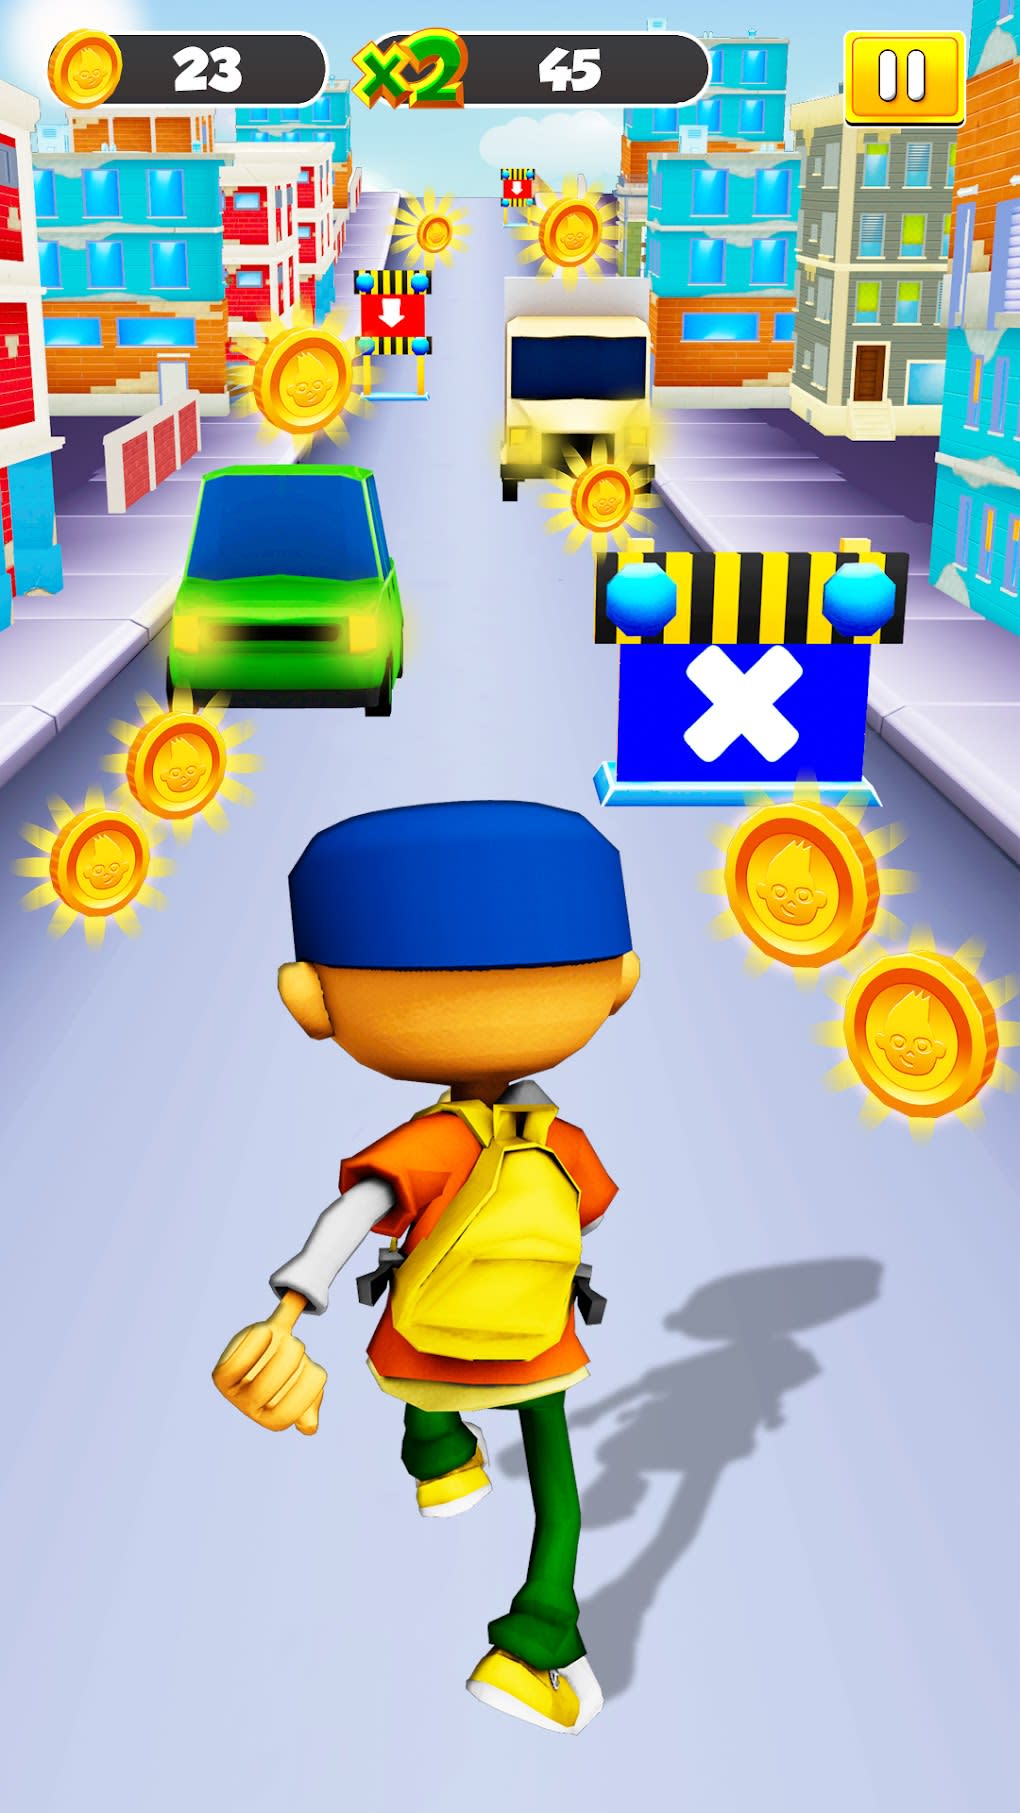 Baixar GUIDES of : Subway SURFERS recente 1.0.4 Android APK